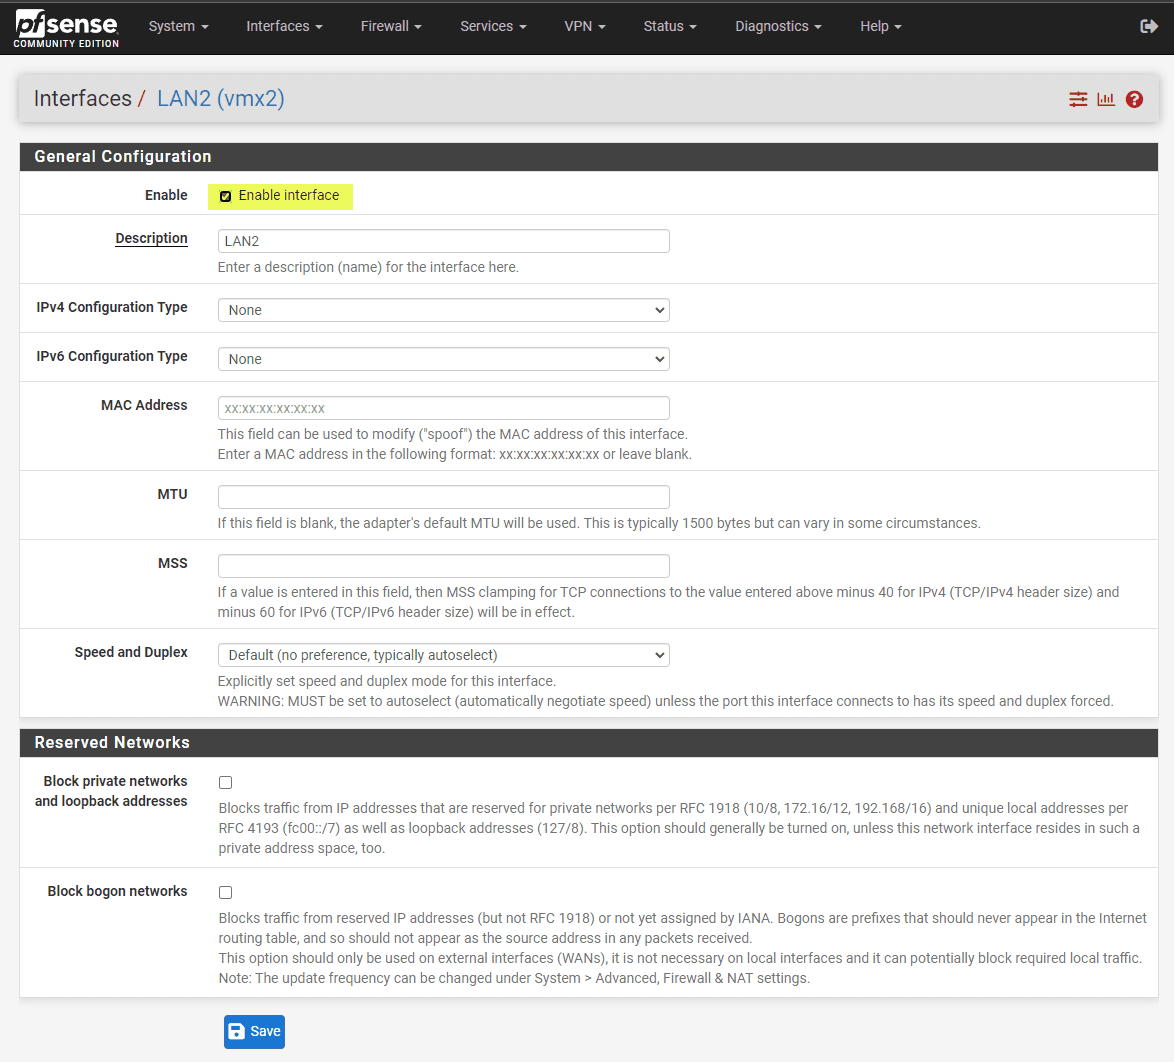 Make sure the parent pfSense interface is enabled